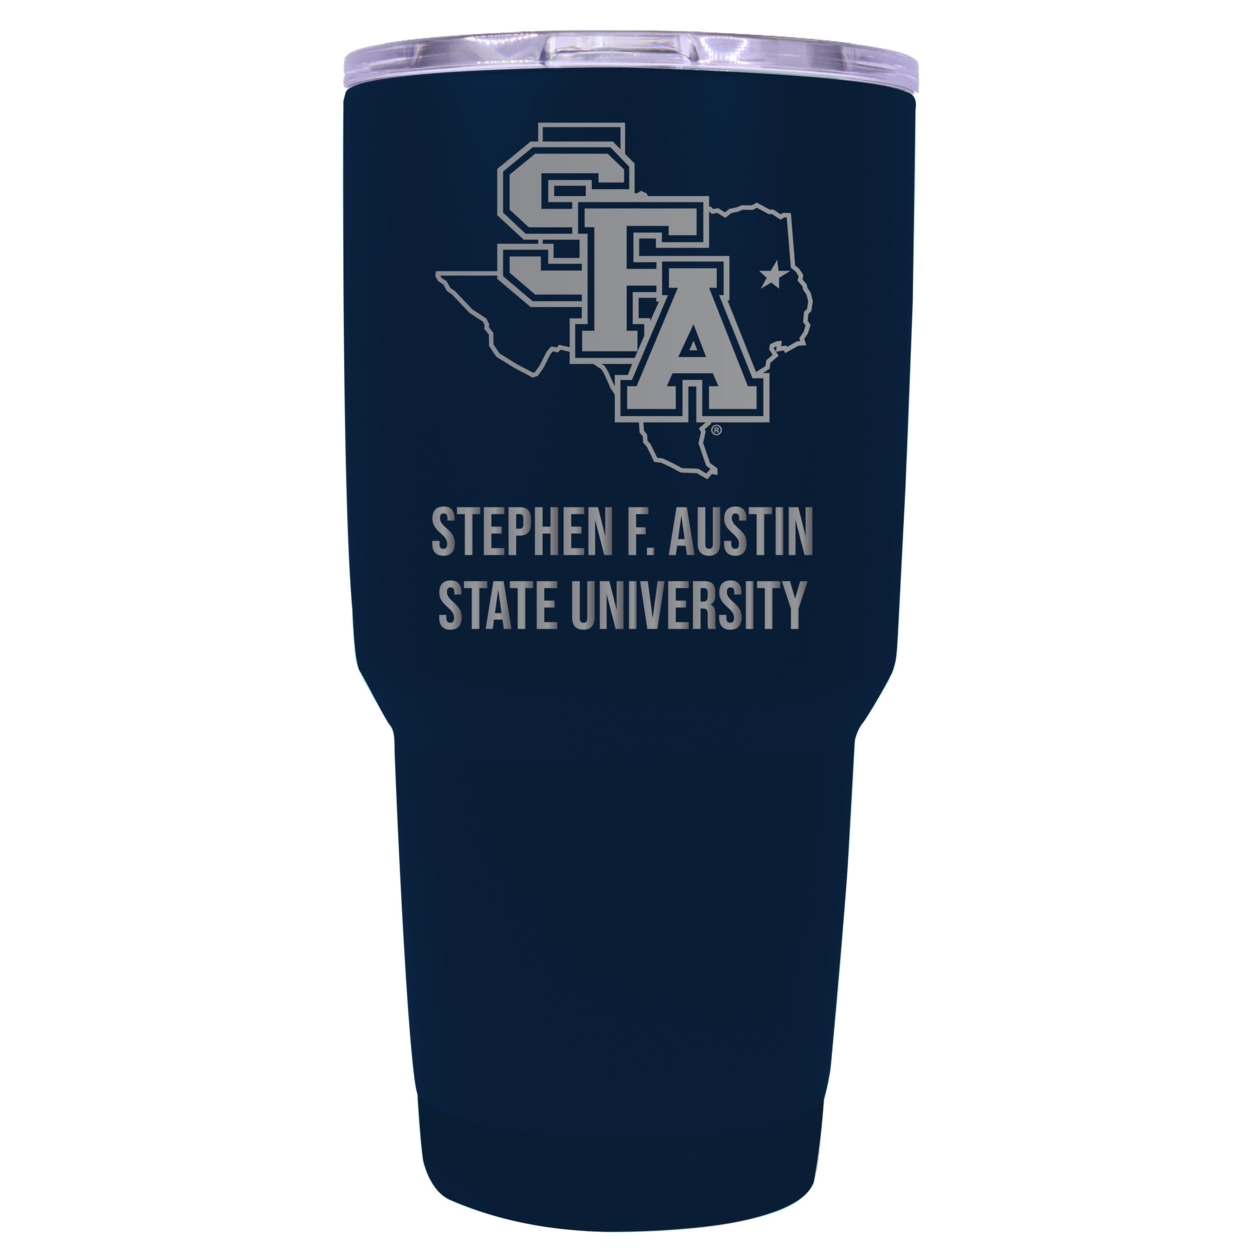 Stephen F. Austin State University 24 Oz Insulated Tumbler Etched - Choose Your Color - White